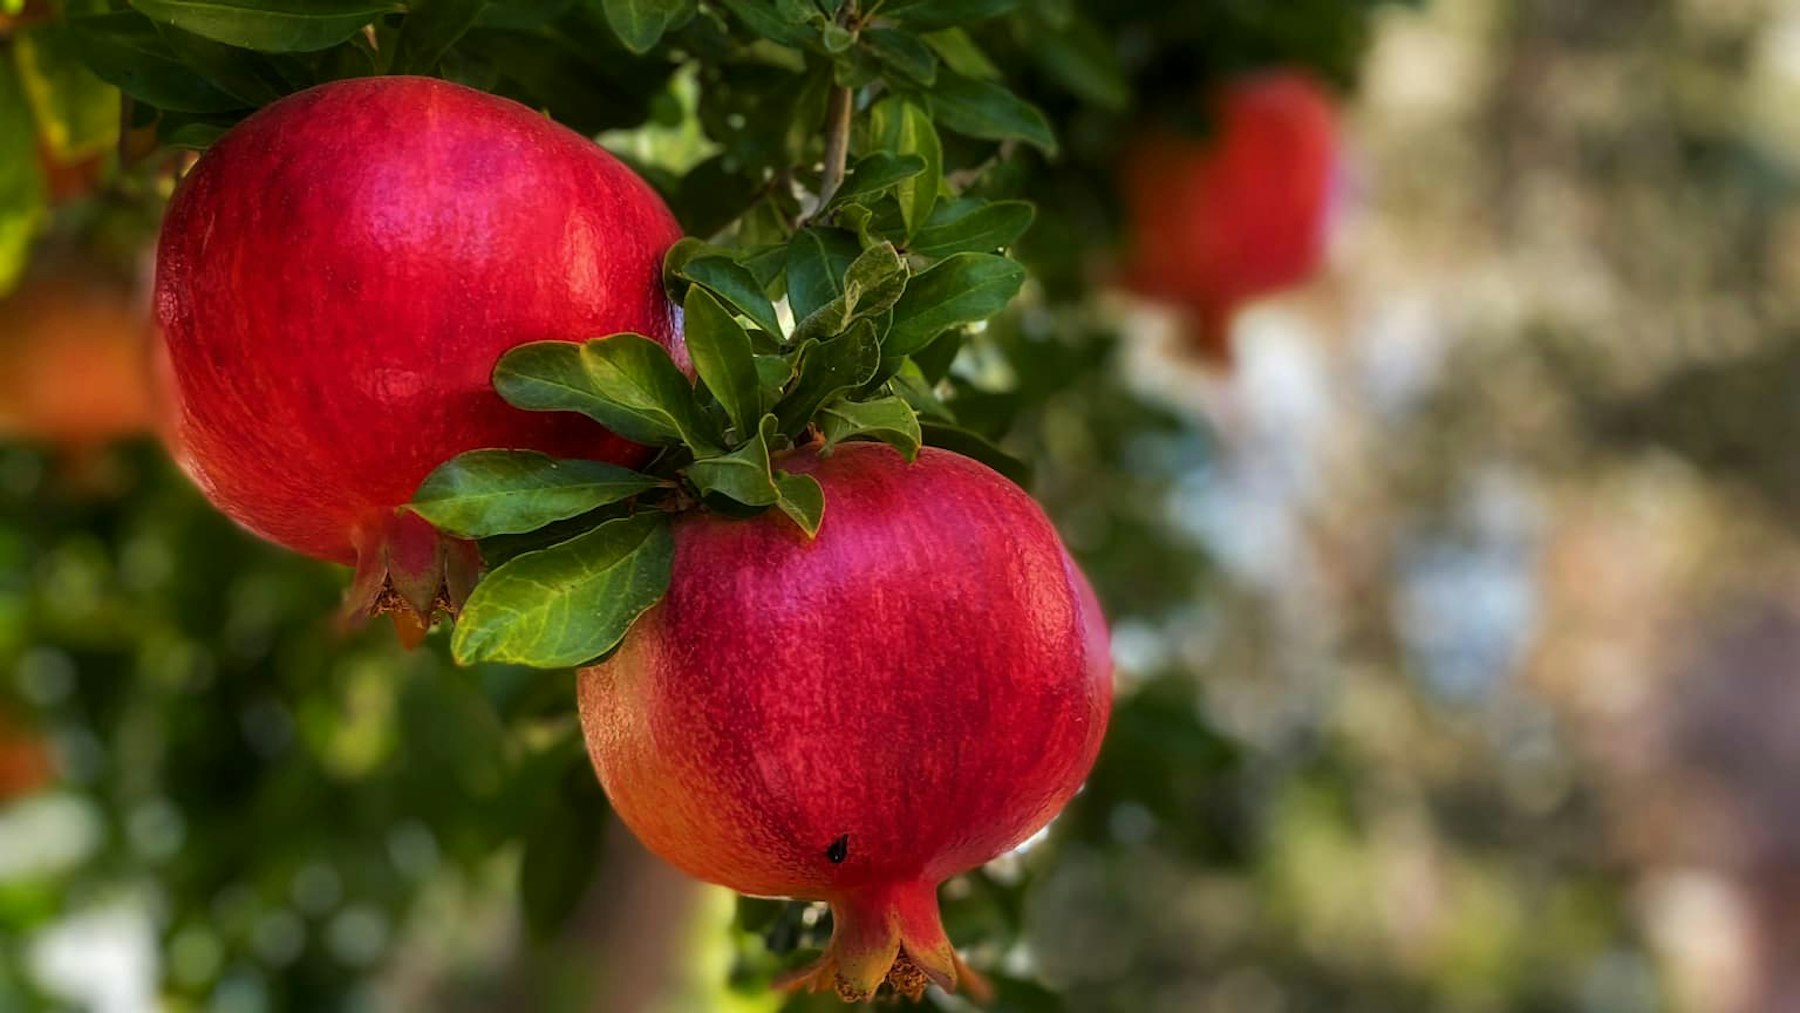 Proper storage saves tons of pomegranate fruit from spoilage, providing farmers with additional income and a good source of nutrients for their families.